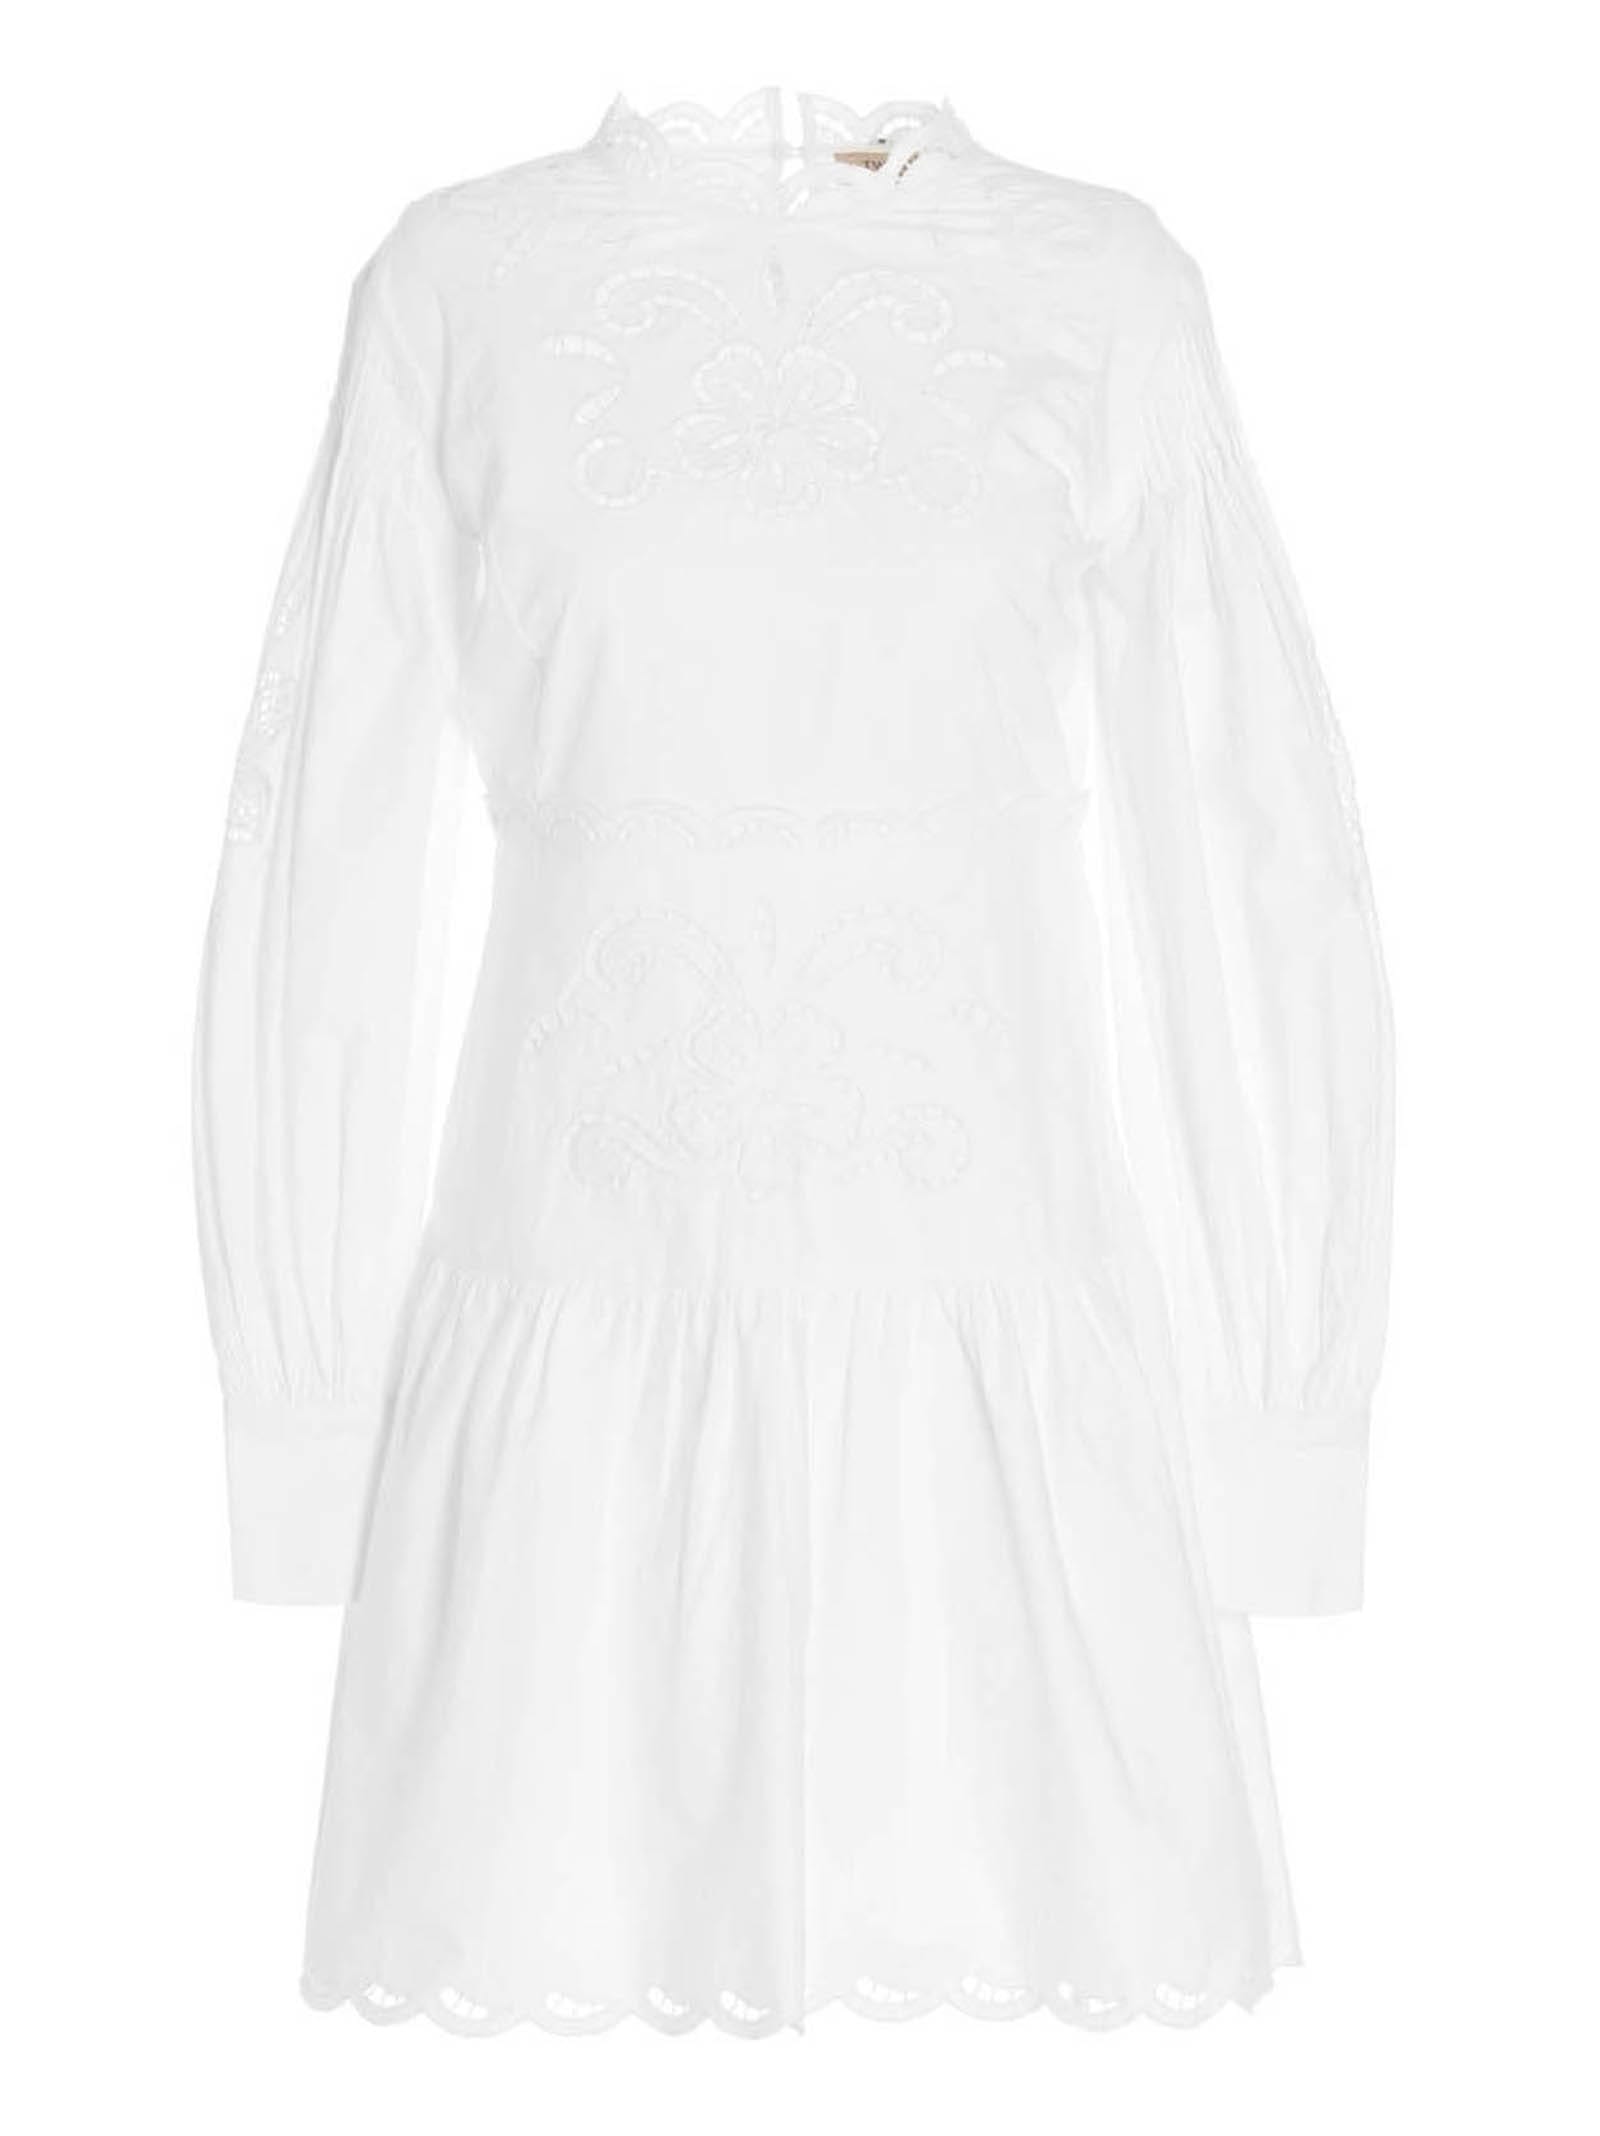 TwinSet Embroidered Cotton Dress